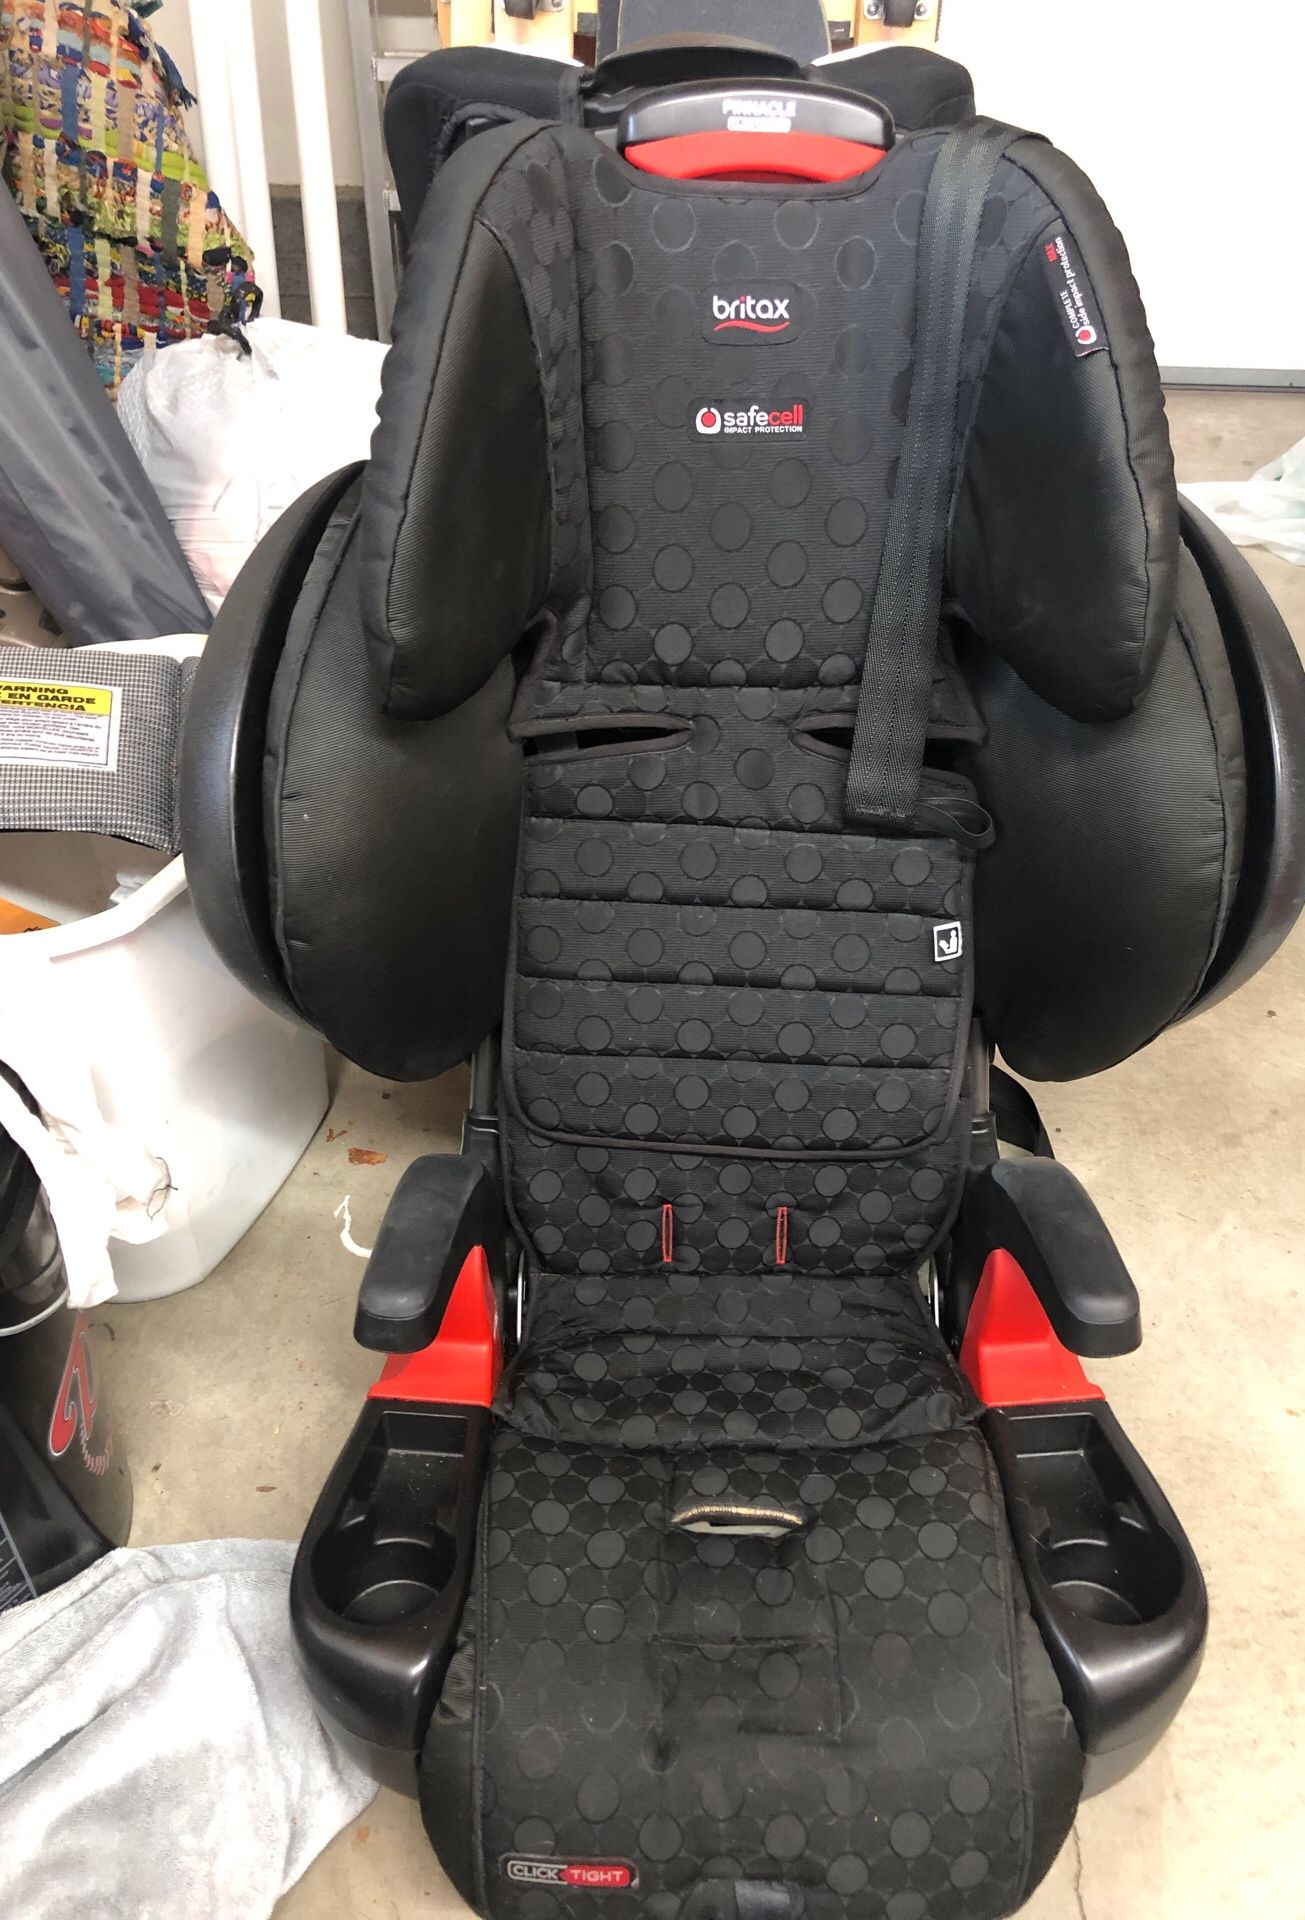 Britax Pinnacle ClickTight Harness-2-Booster Car Seat - 3 Layer Impact Protection - 25 to 120 Pounds - Cool Flow Ventilating Fabric,